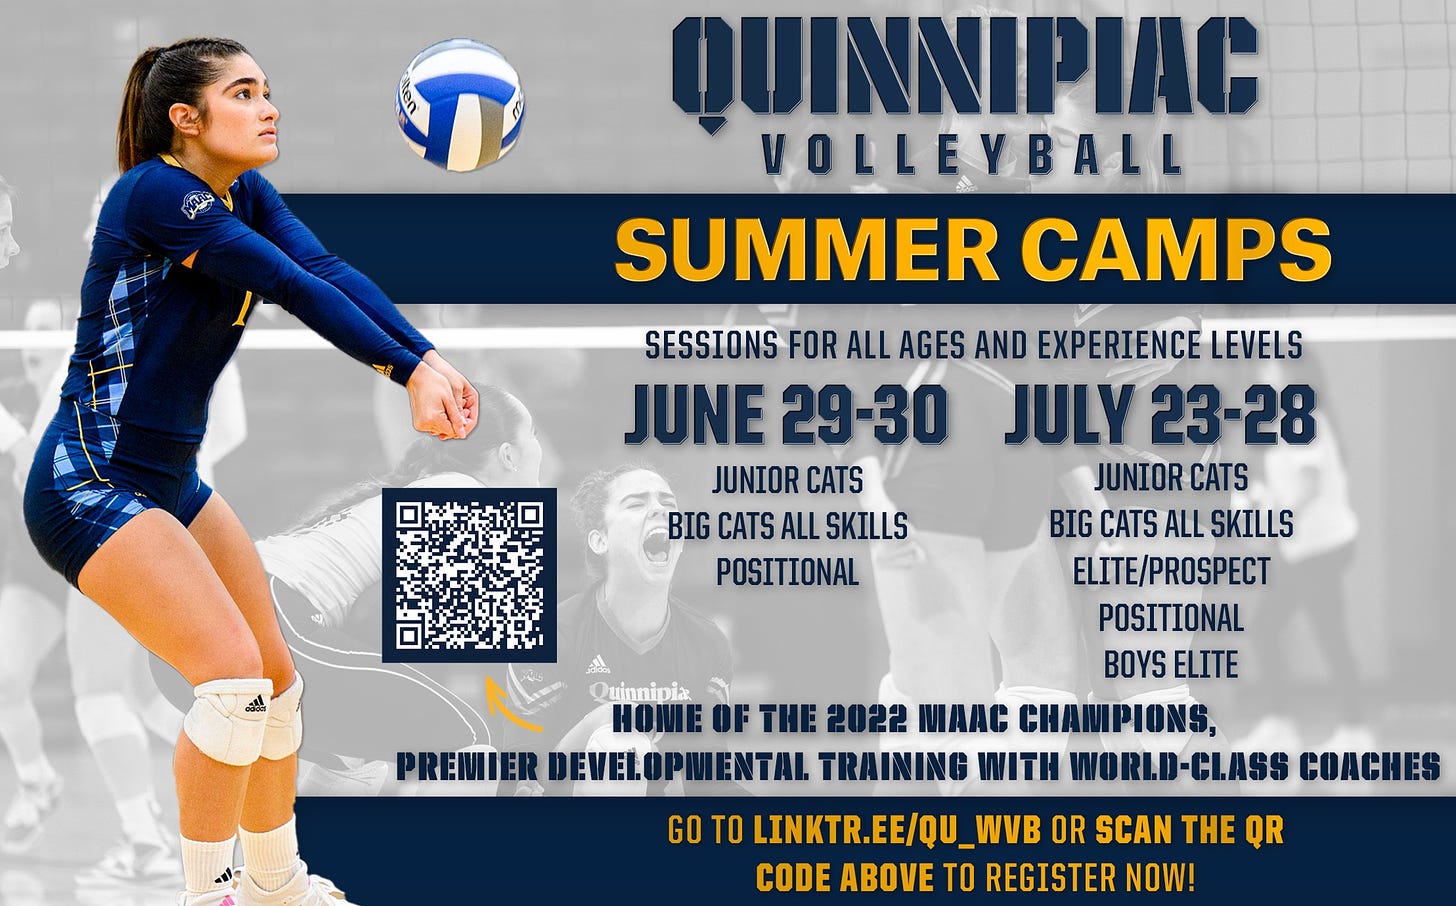 May be an image of 2 people, people playing voleyball and text that says 'ብ Φ VOLLEYBALL SUMMER 幸 SESSIONS FOR ALL AGES AND EXPERIENCE LEVELS JUNE 29-30 JULY 23-28 JUNIOR CATS JUNIOR CATS BIG CATS ALL SKILLS BIG CATS ALL SKILLS POSITIONAL ELITE/PROSPECT POSITIONAL BOYS ELITE Quinnipia HOME OF THE 2022 NAAC CHAMIPIONS, PREMIER DEVELOPMENTAI TRAINING MITH WIORL.D-CLASS GO TO LINKTR.EE/QU_W EE/QU_ OR SCAN THE QR CODE ABOVE TO REGISTER NOW!'